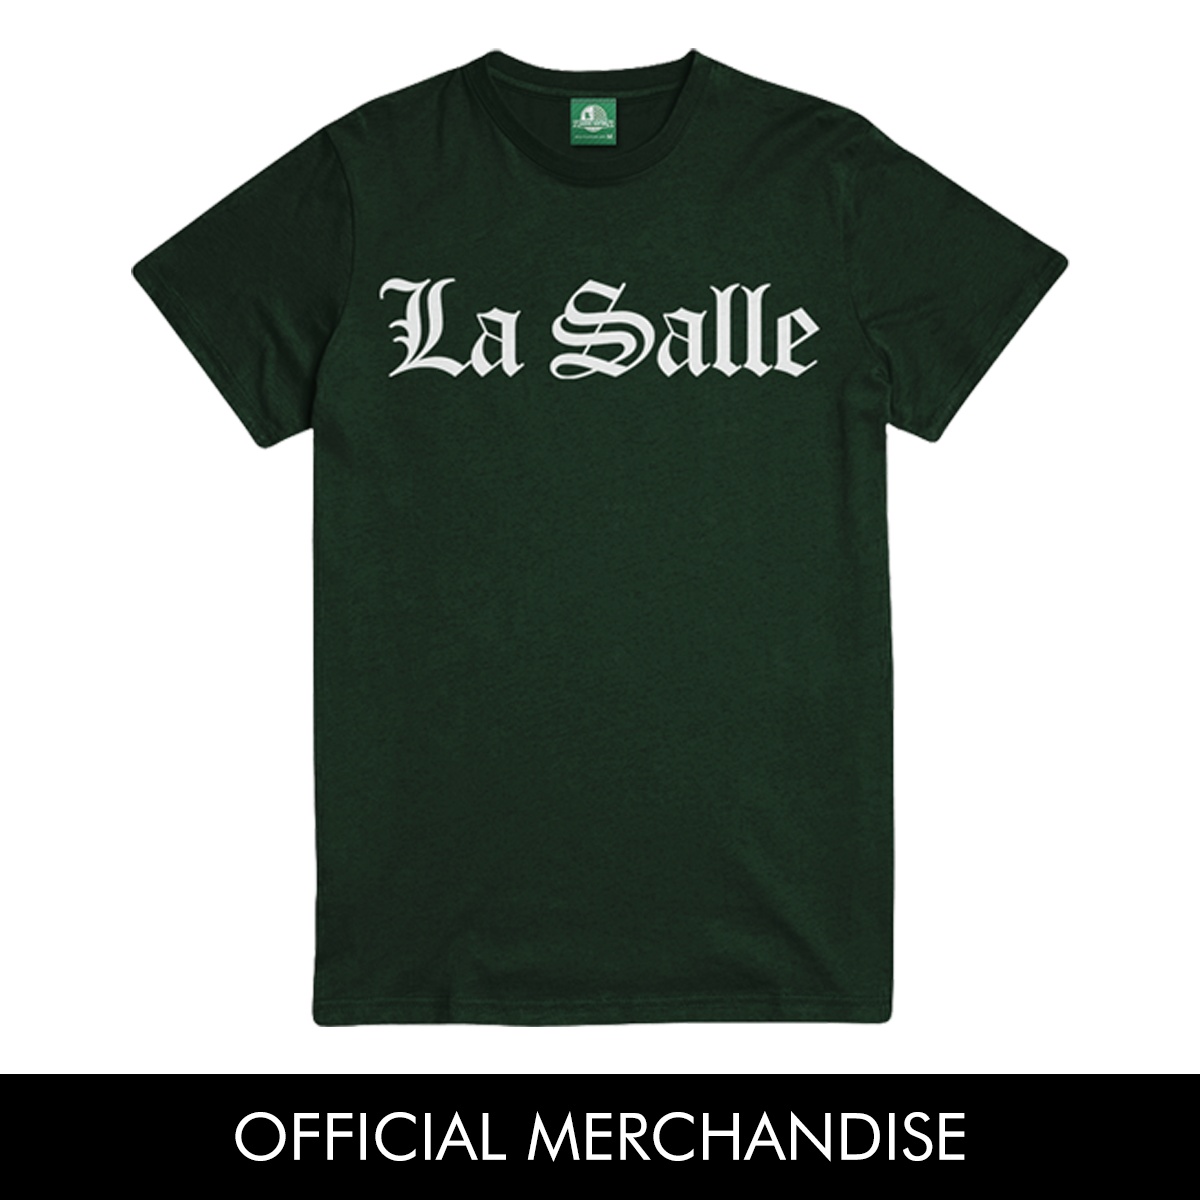 La Salle Shirts For Sale Online Off 75 Free Shipping - roblox bypassed shirts july 2019